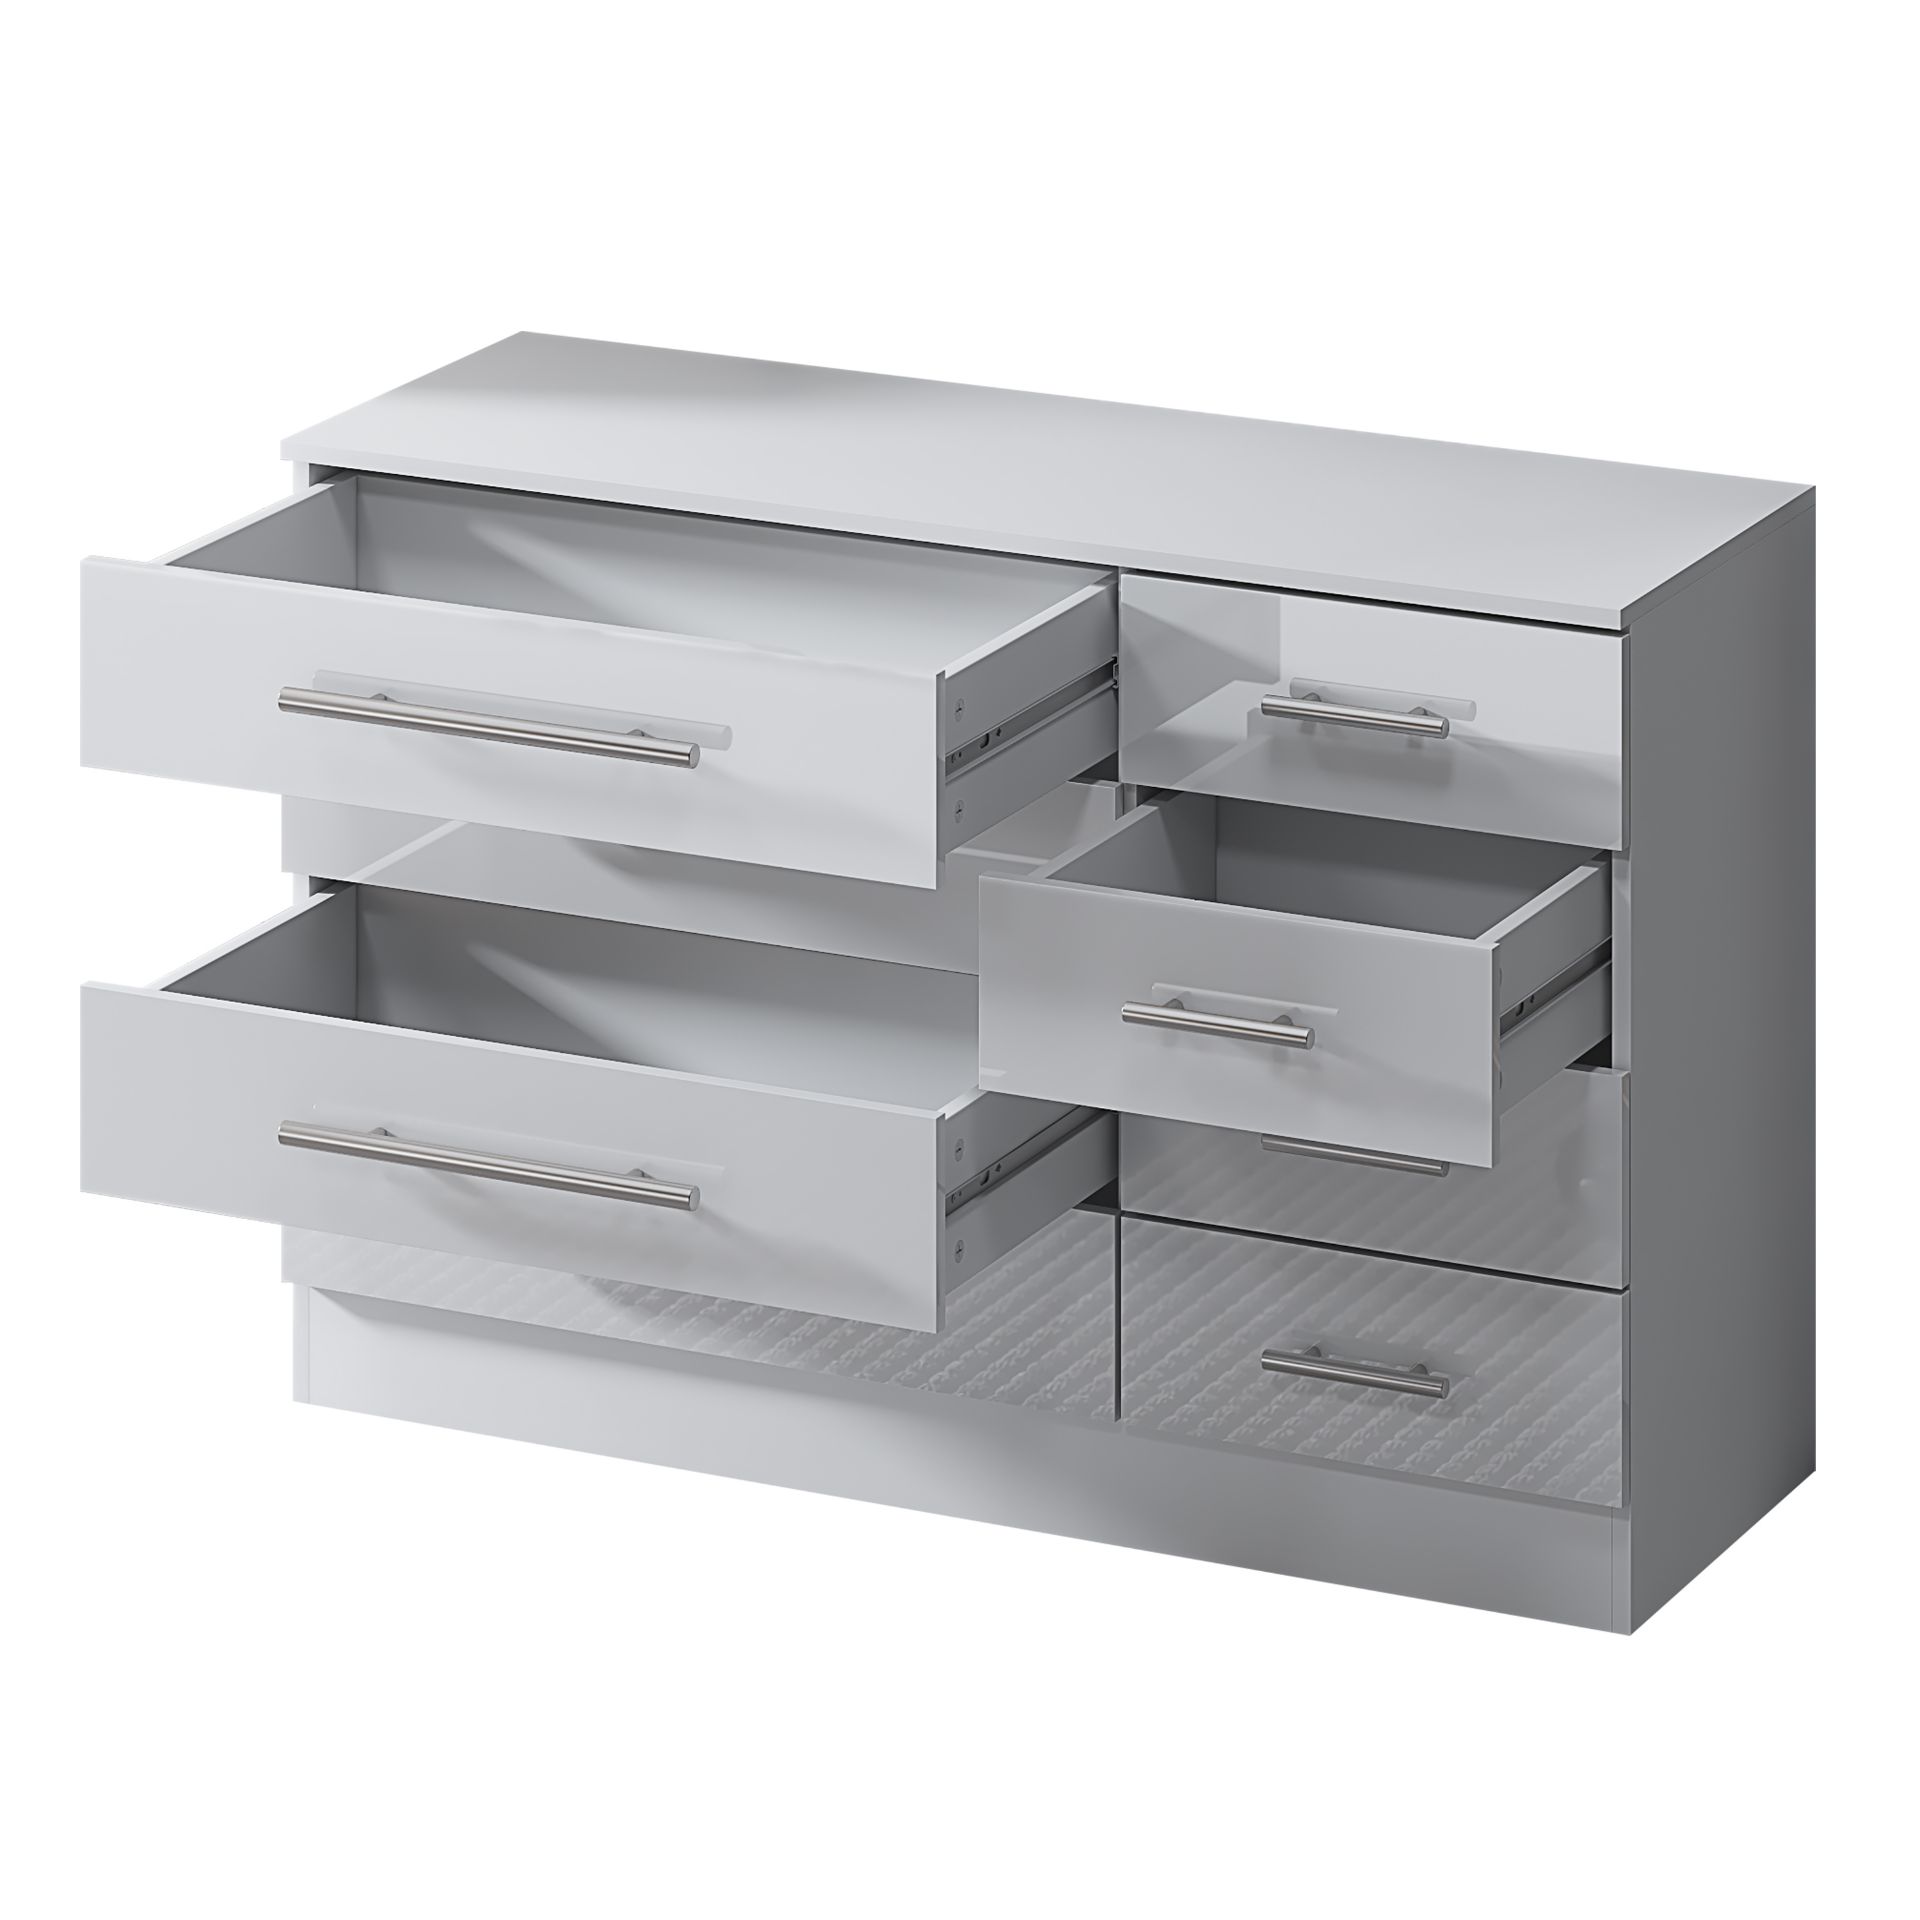 WHITE 8 DRAWER CHEST WITH HIGH GLOSS FRONTS AND METAL HANDLES - Image 2 of 6